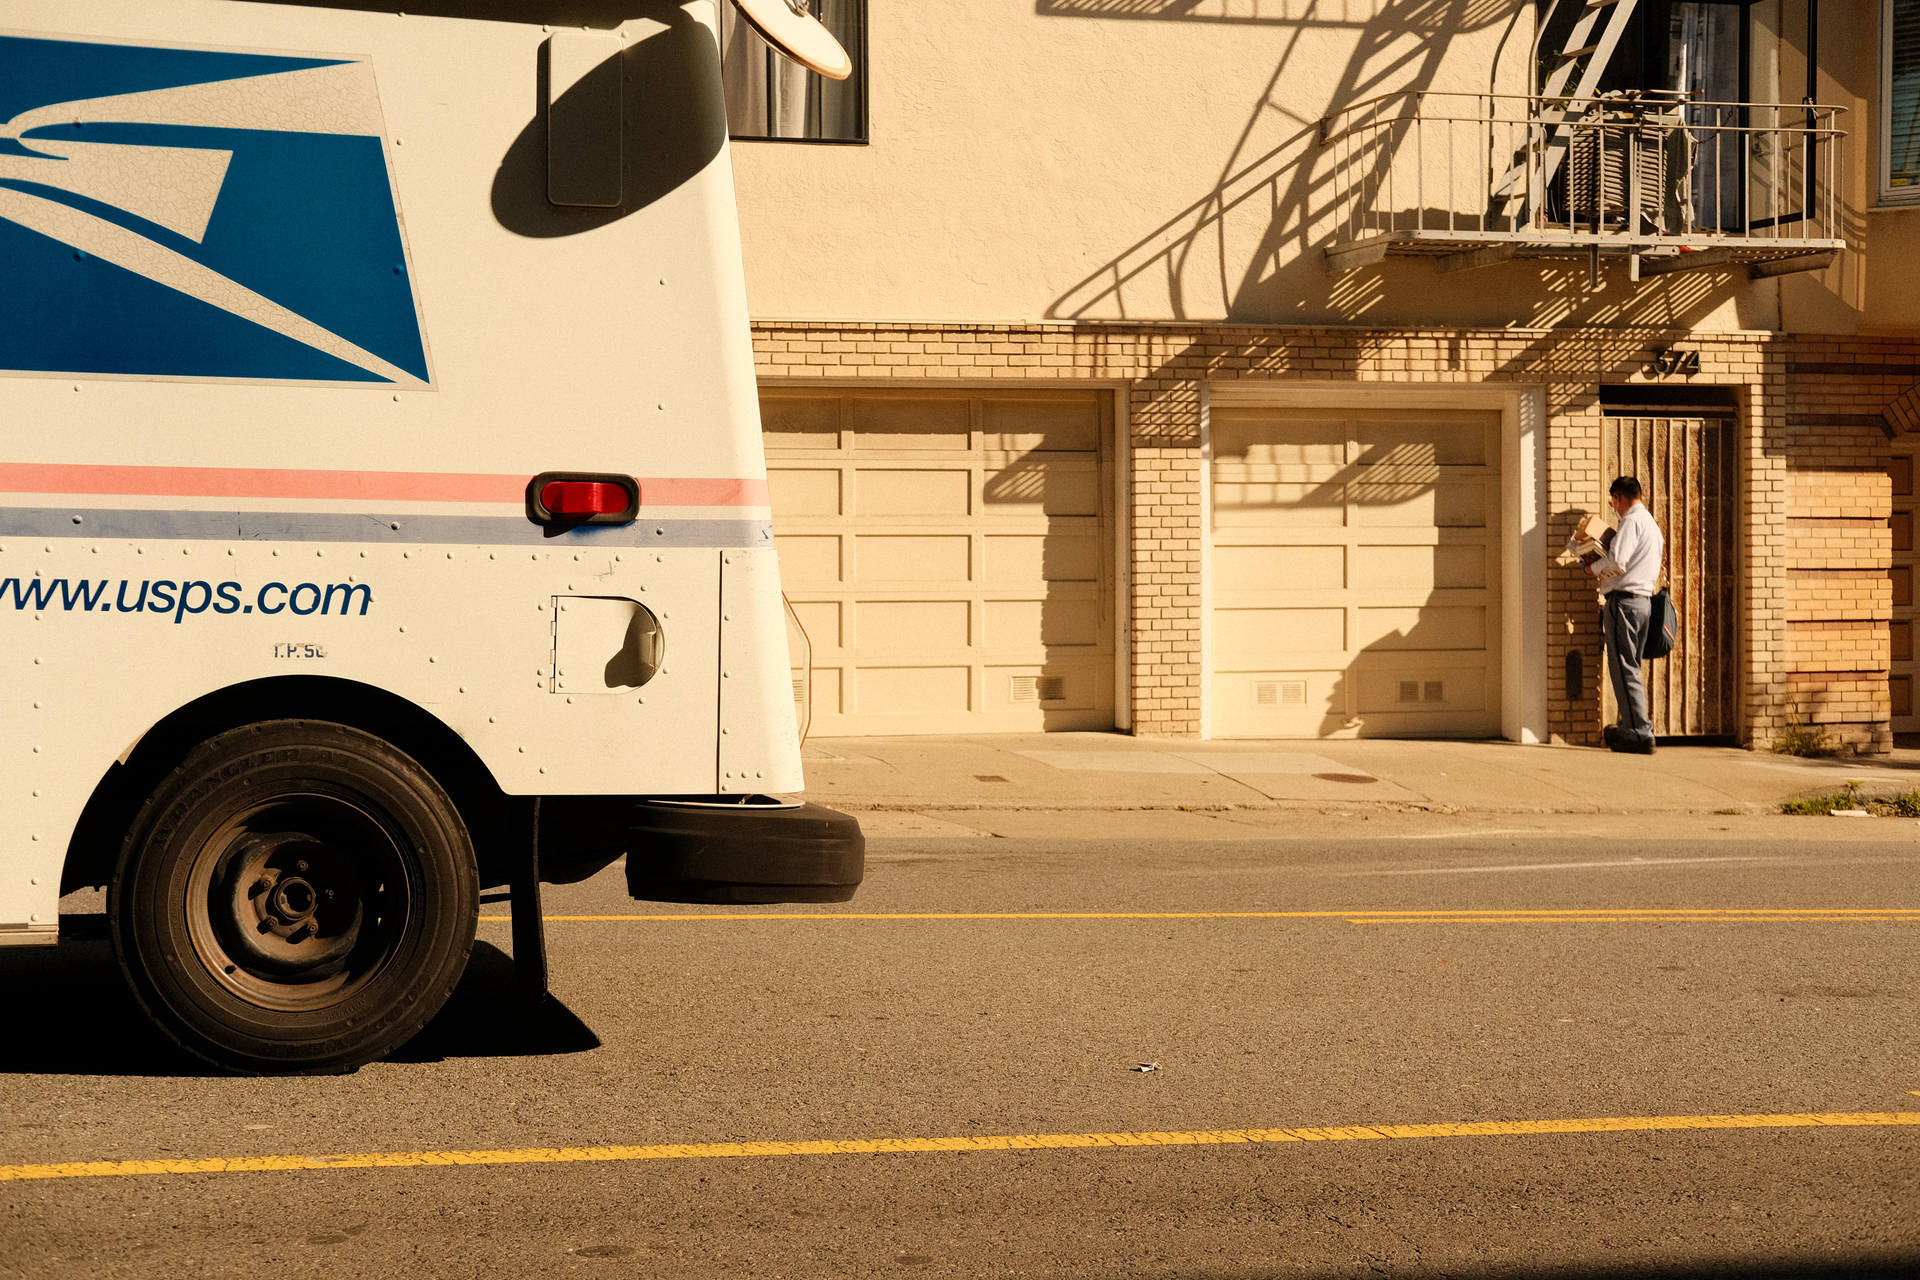 USPS Tracking Truck Parked During Daytime Wallpaper